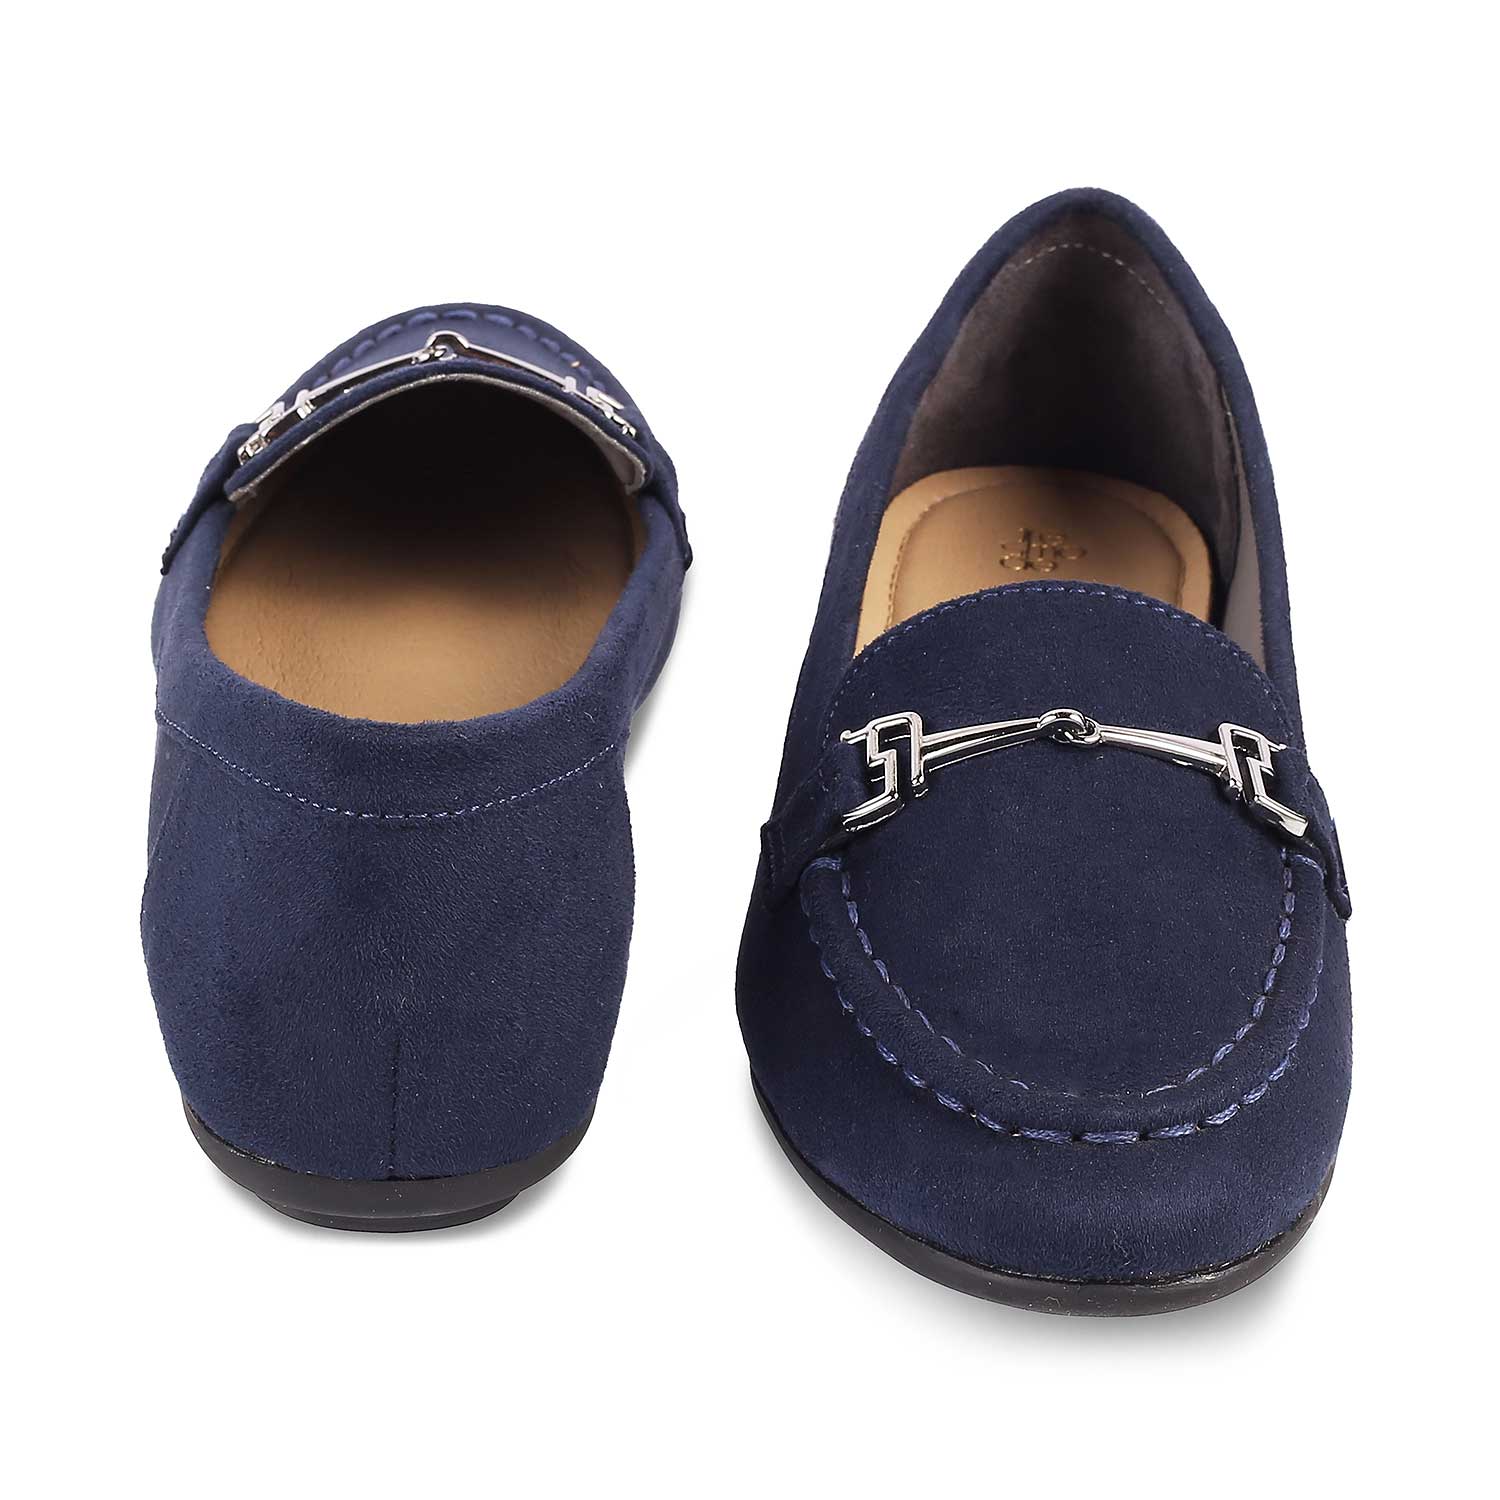 The Angelus Blue Women's Dress Loafers Tresmode